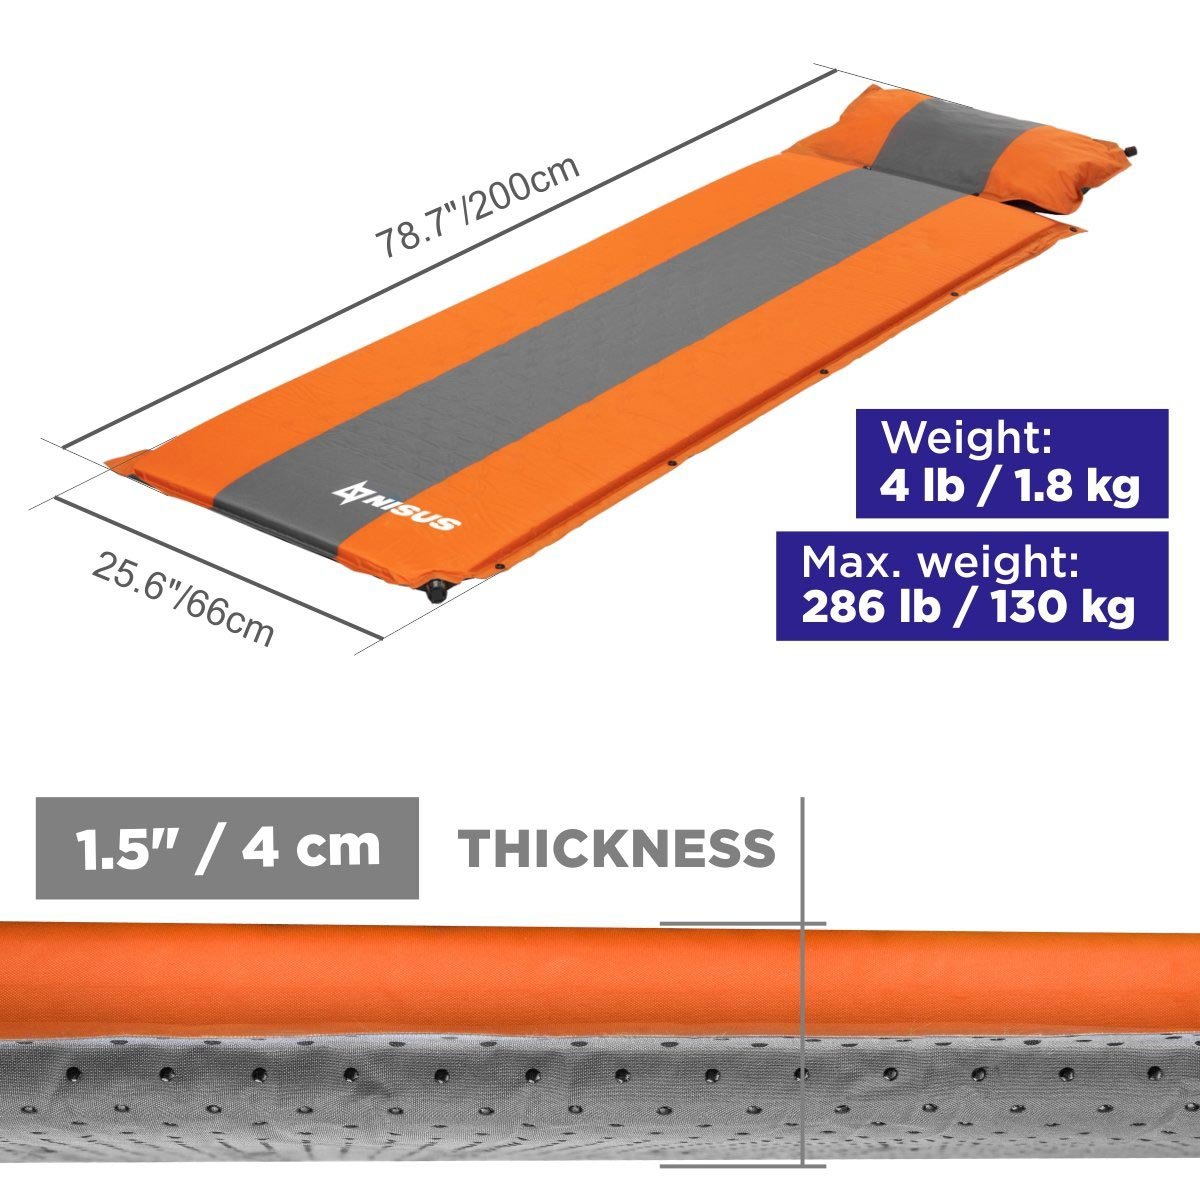 78.7" long, 25.6" wide, 1.5" thick Orange Self Inflating Sleeping Pad with Pillow